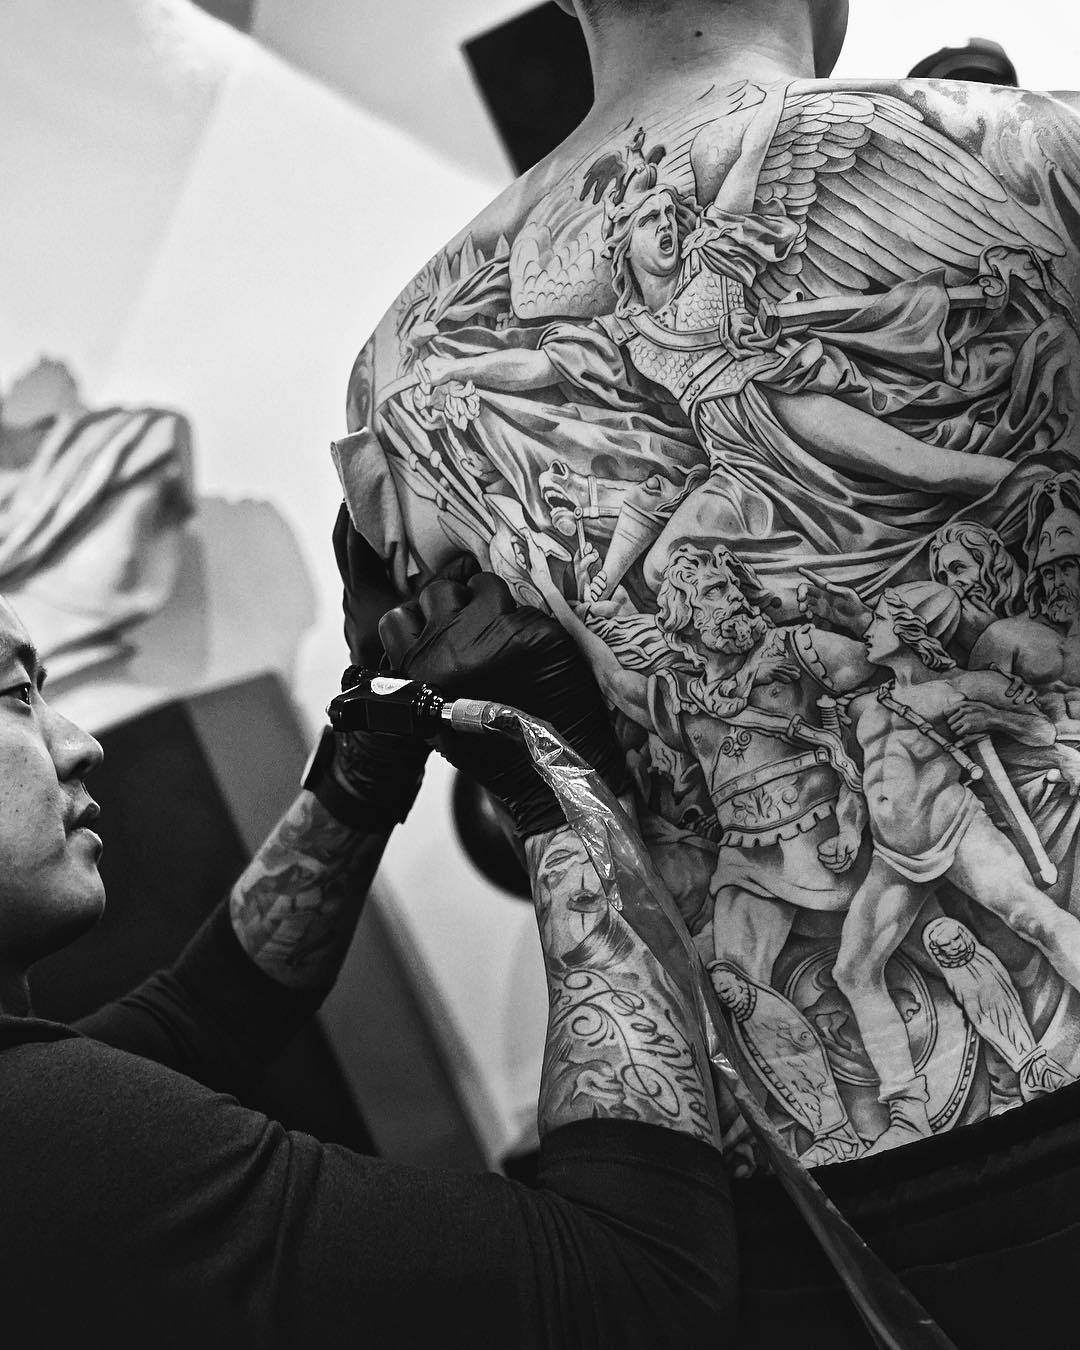 The Renaissance in the Jun Chas tattoo works  iNKPPL  Jun cha tattoo  Hyper realistic tattoo Tattoos for guys